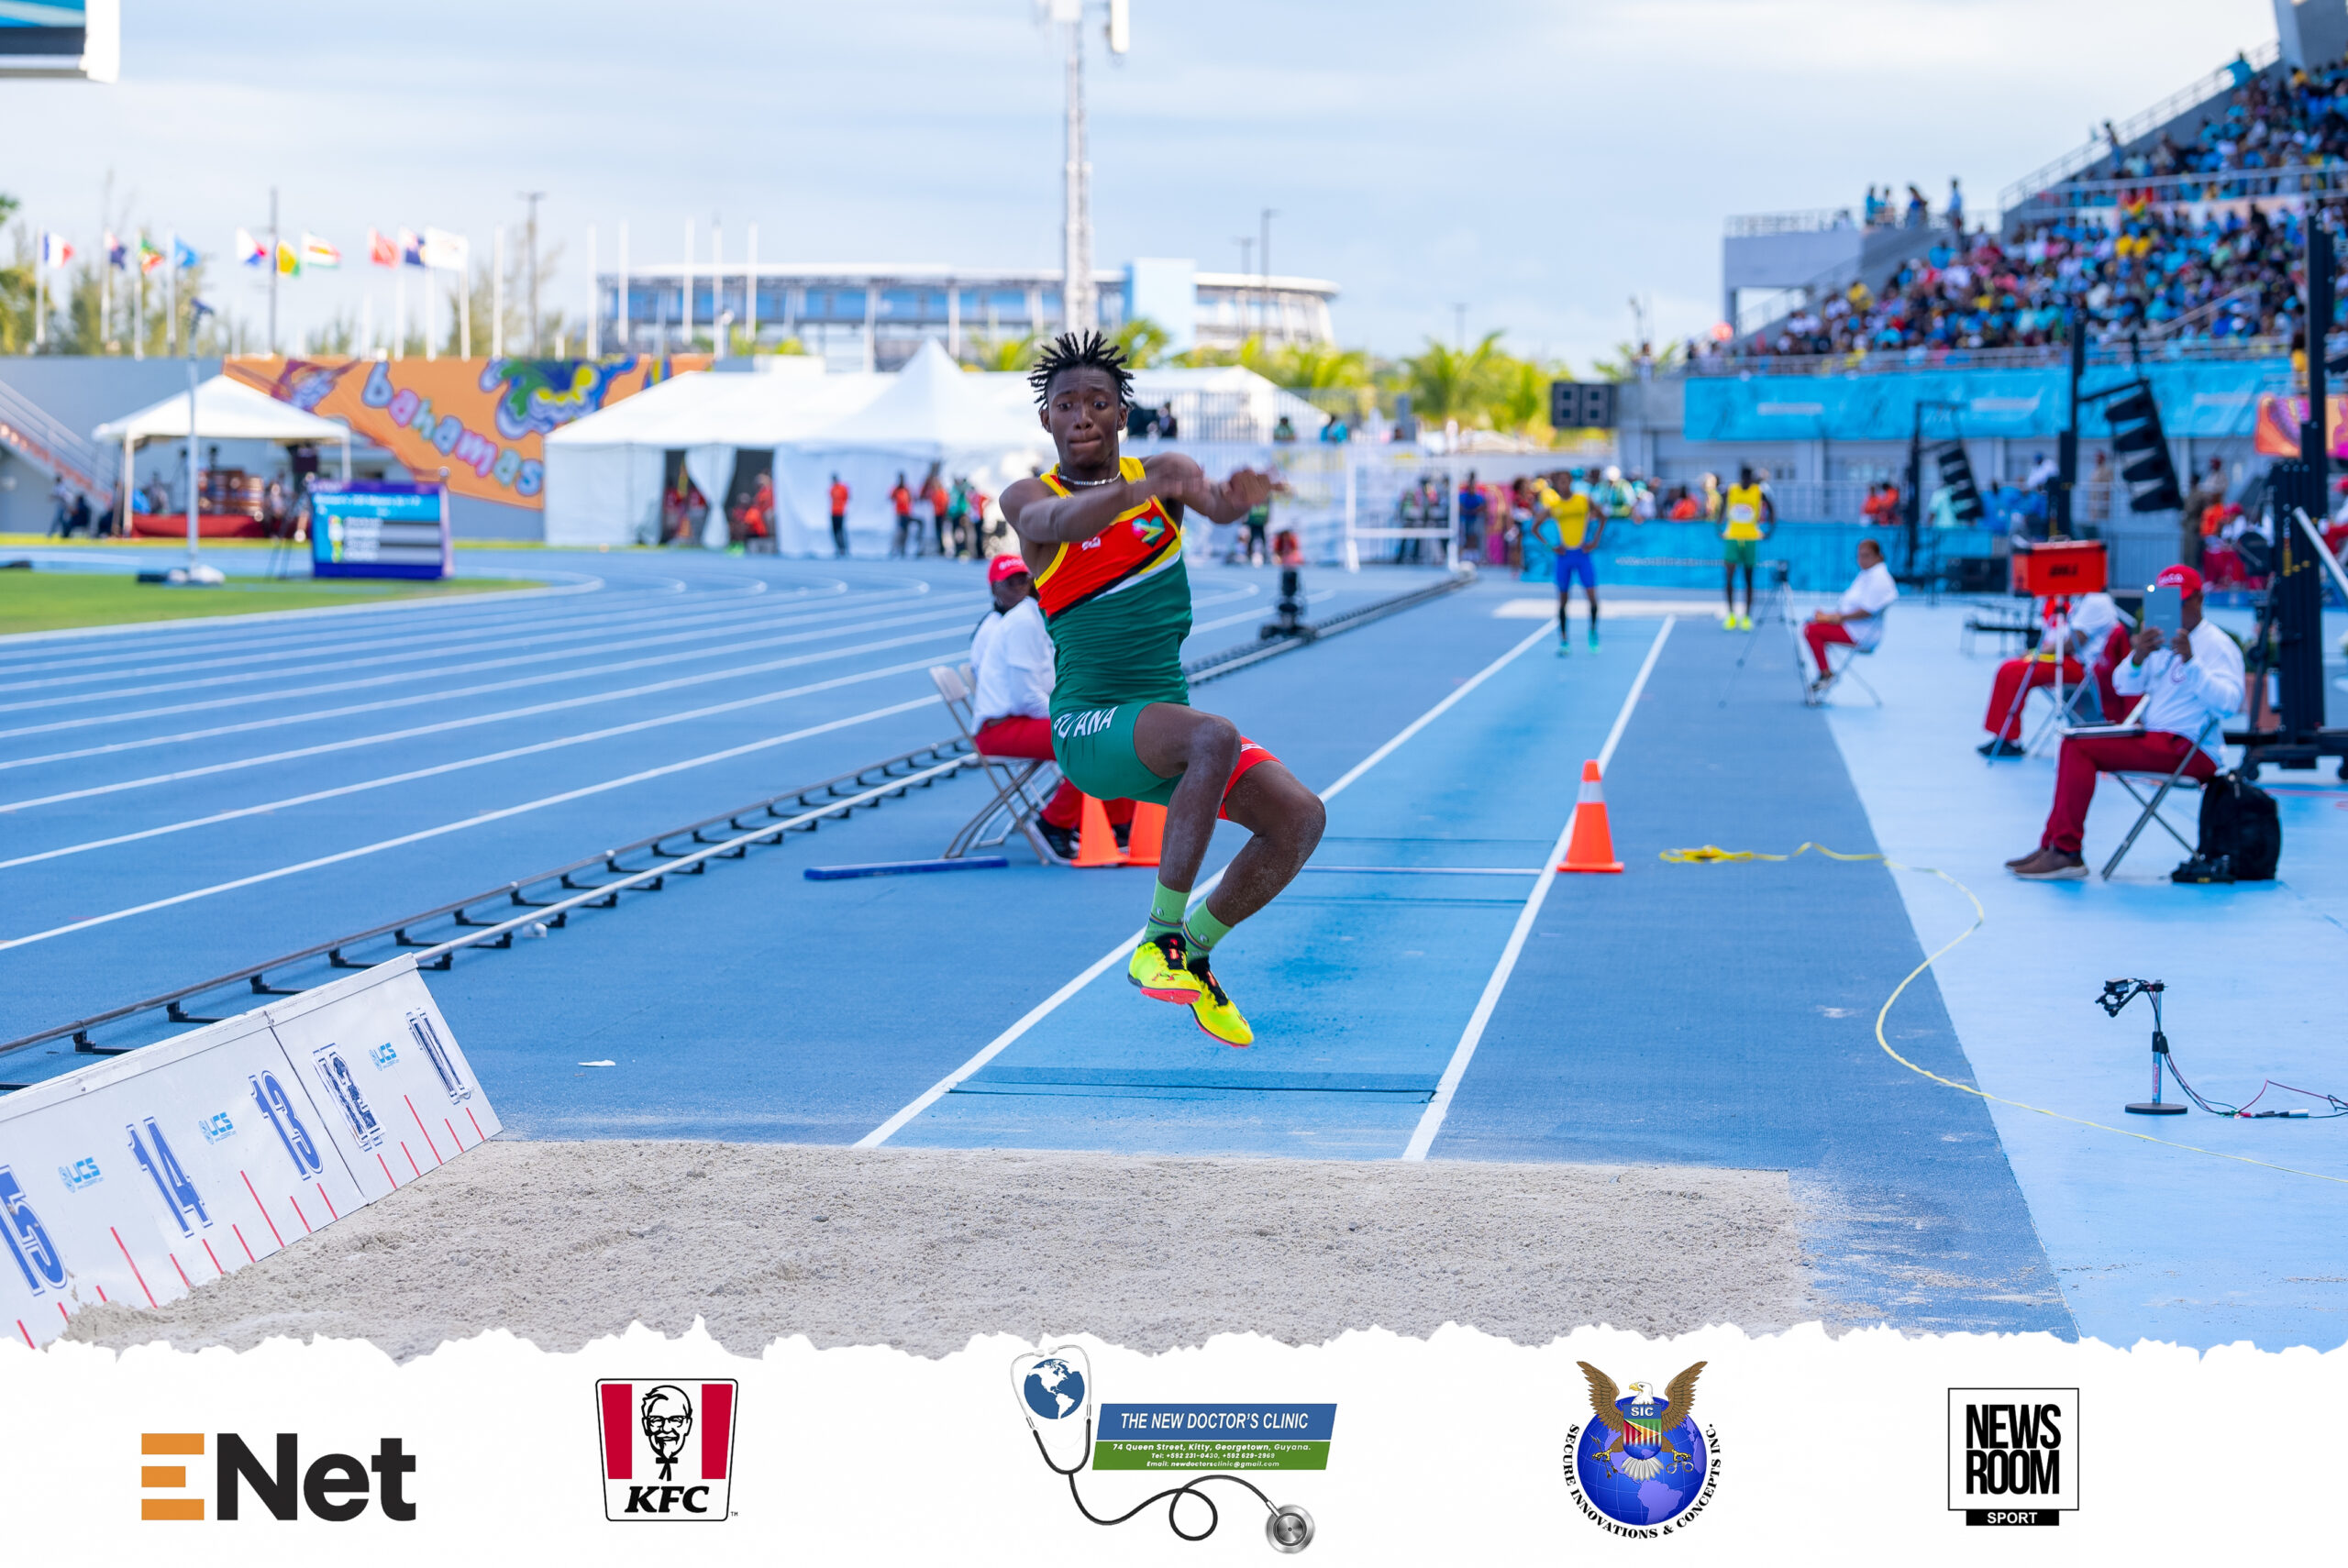 Carifta Games 2023 Gibbons Gold Harvey Silver Saul Bronze Shine For Guyana On Day Two